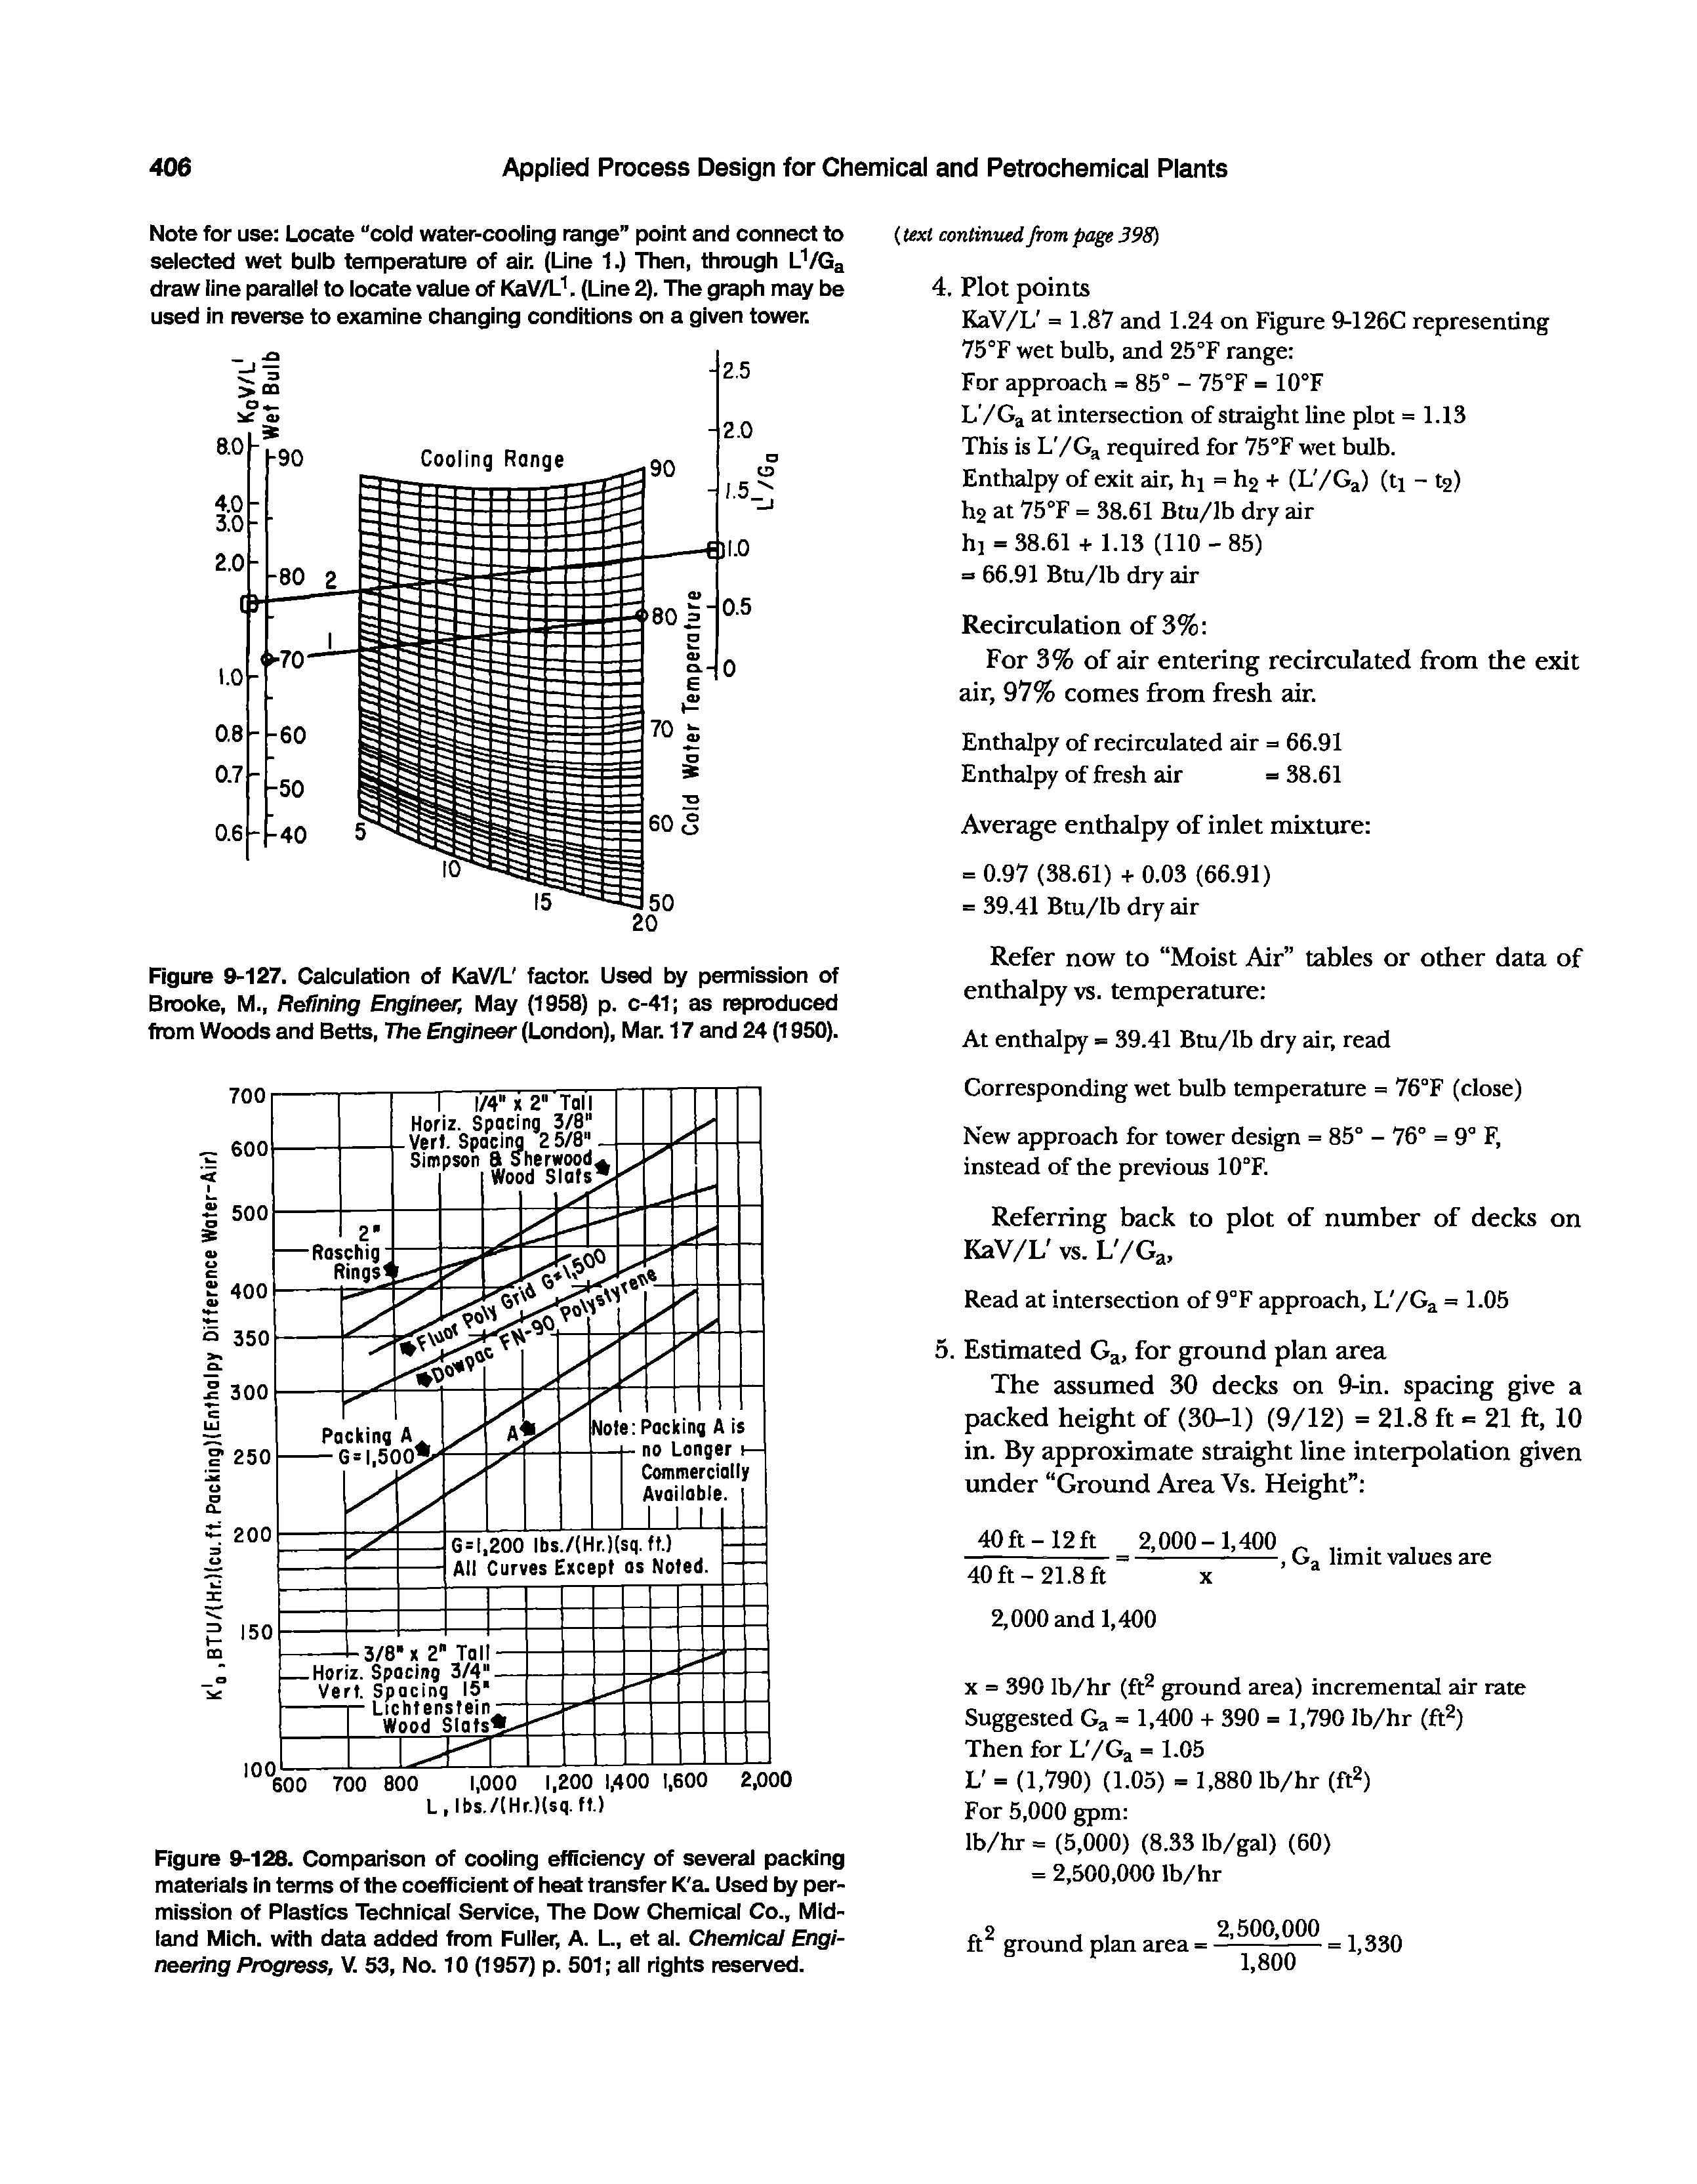 Figure 9-128. Companson of cooling efficiency of several packing materials in terms of the coefficient of heat transfer K a. Used by permission of Plastics Technical Service, The Dow Chemical Co., Midland Mich, with data added from Fuller, A. L., et al. Chemical Engineering Progress, V. 53, No. 10 (1957) p. 501 all rights reserved.